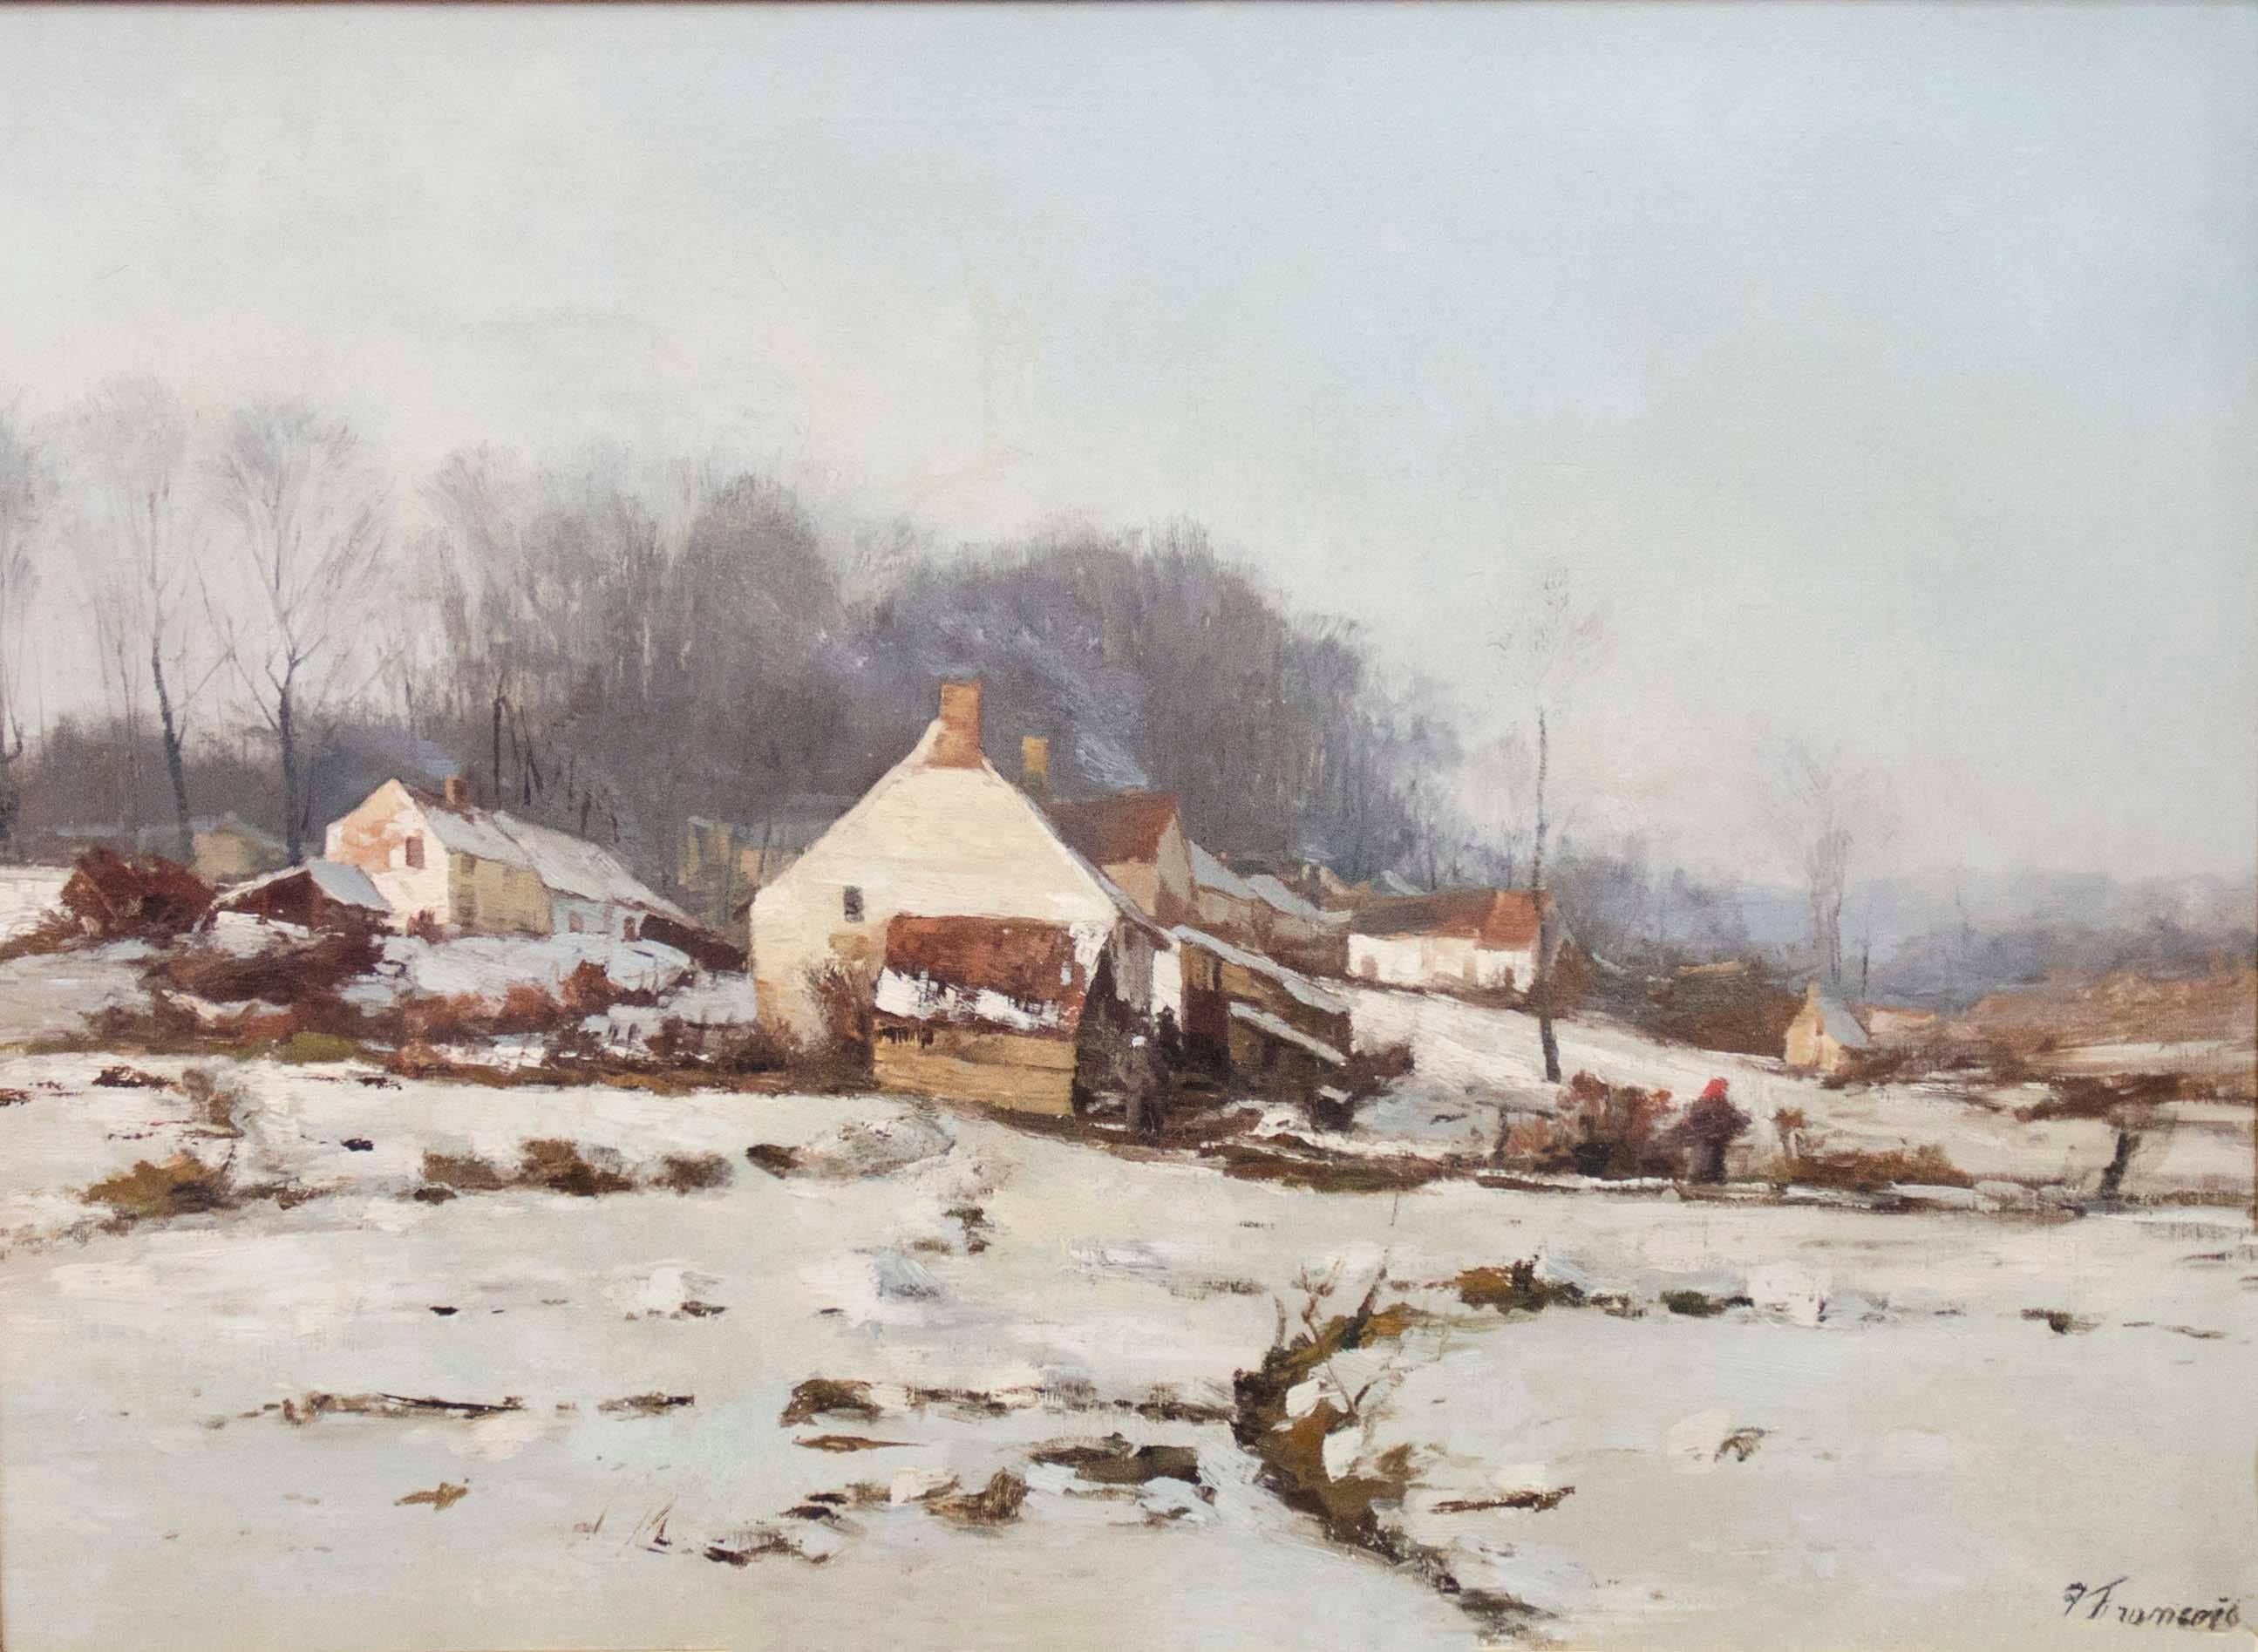 Charming animated winter view of the Belgian countryside. Very nice impressionist style with distinctive and large brush strokes. Oil on canvas. Signed lower right. Beautiful and authentic antique frame.

Dimensions: H 88cm x W 63cm, H 120 x W 95